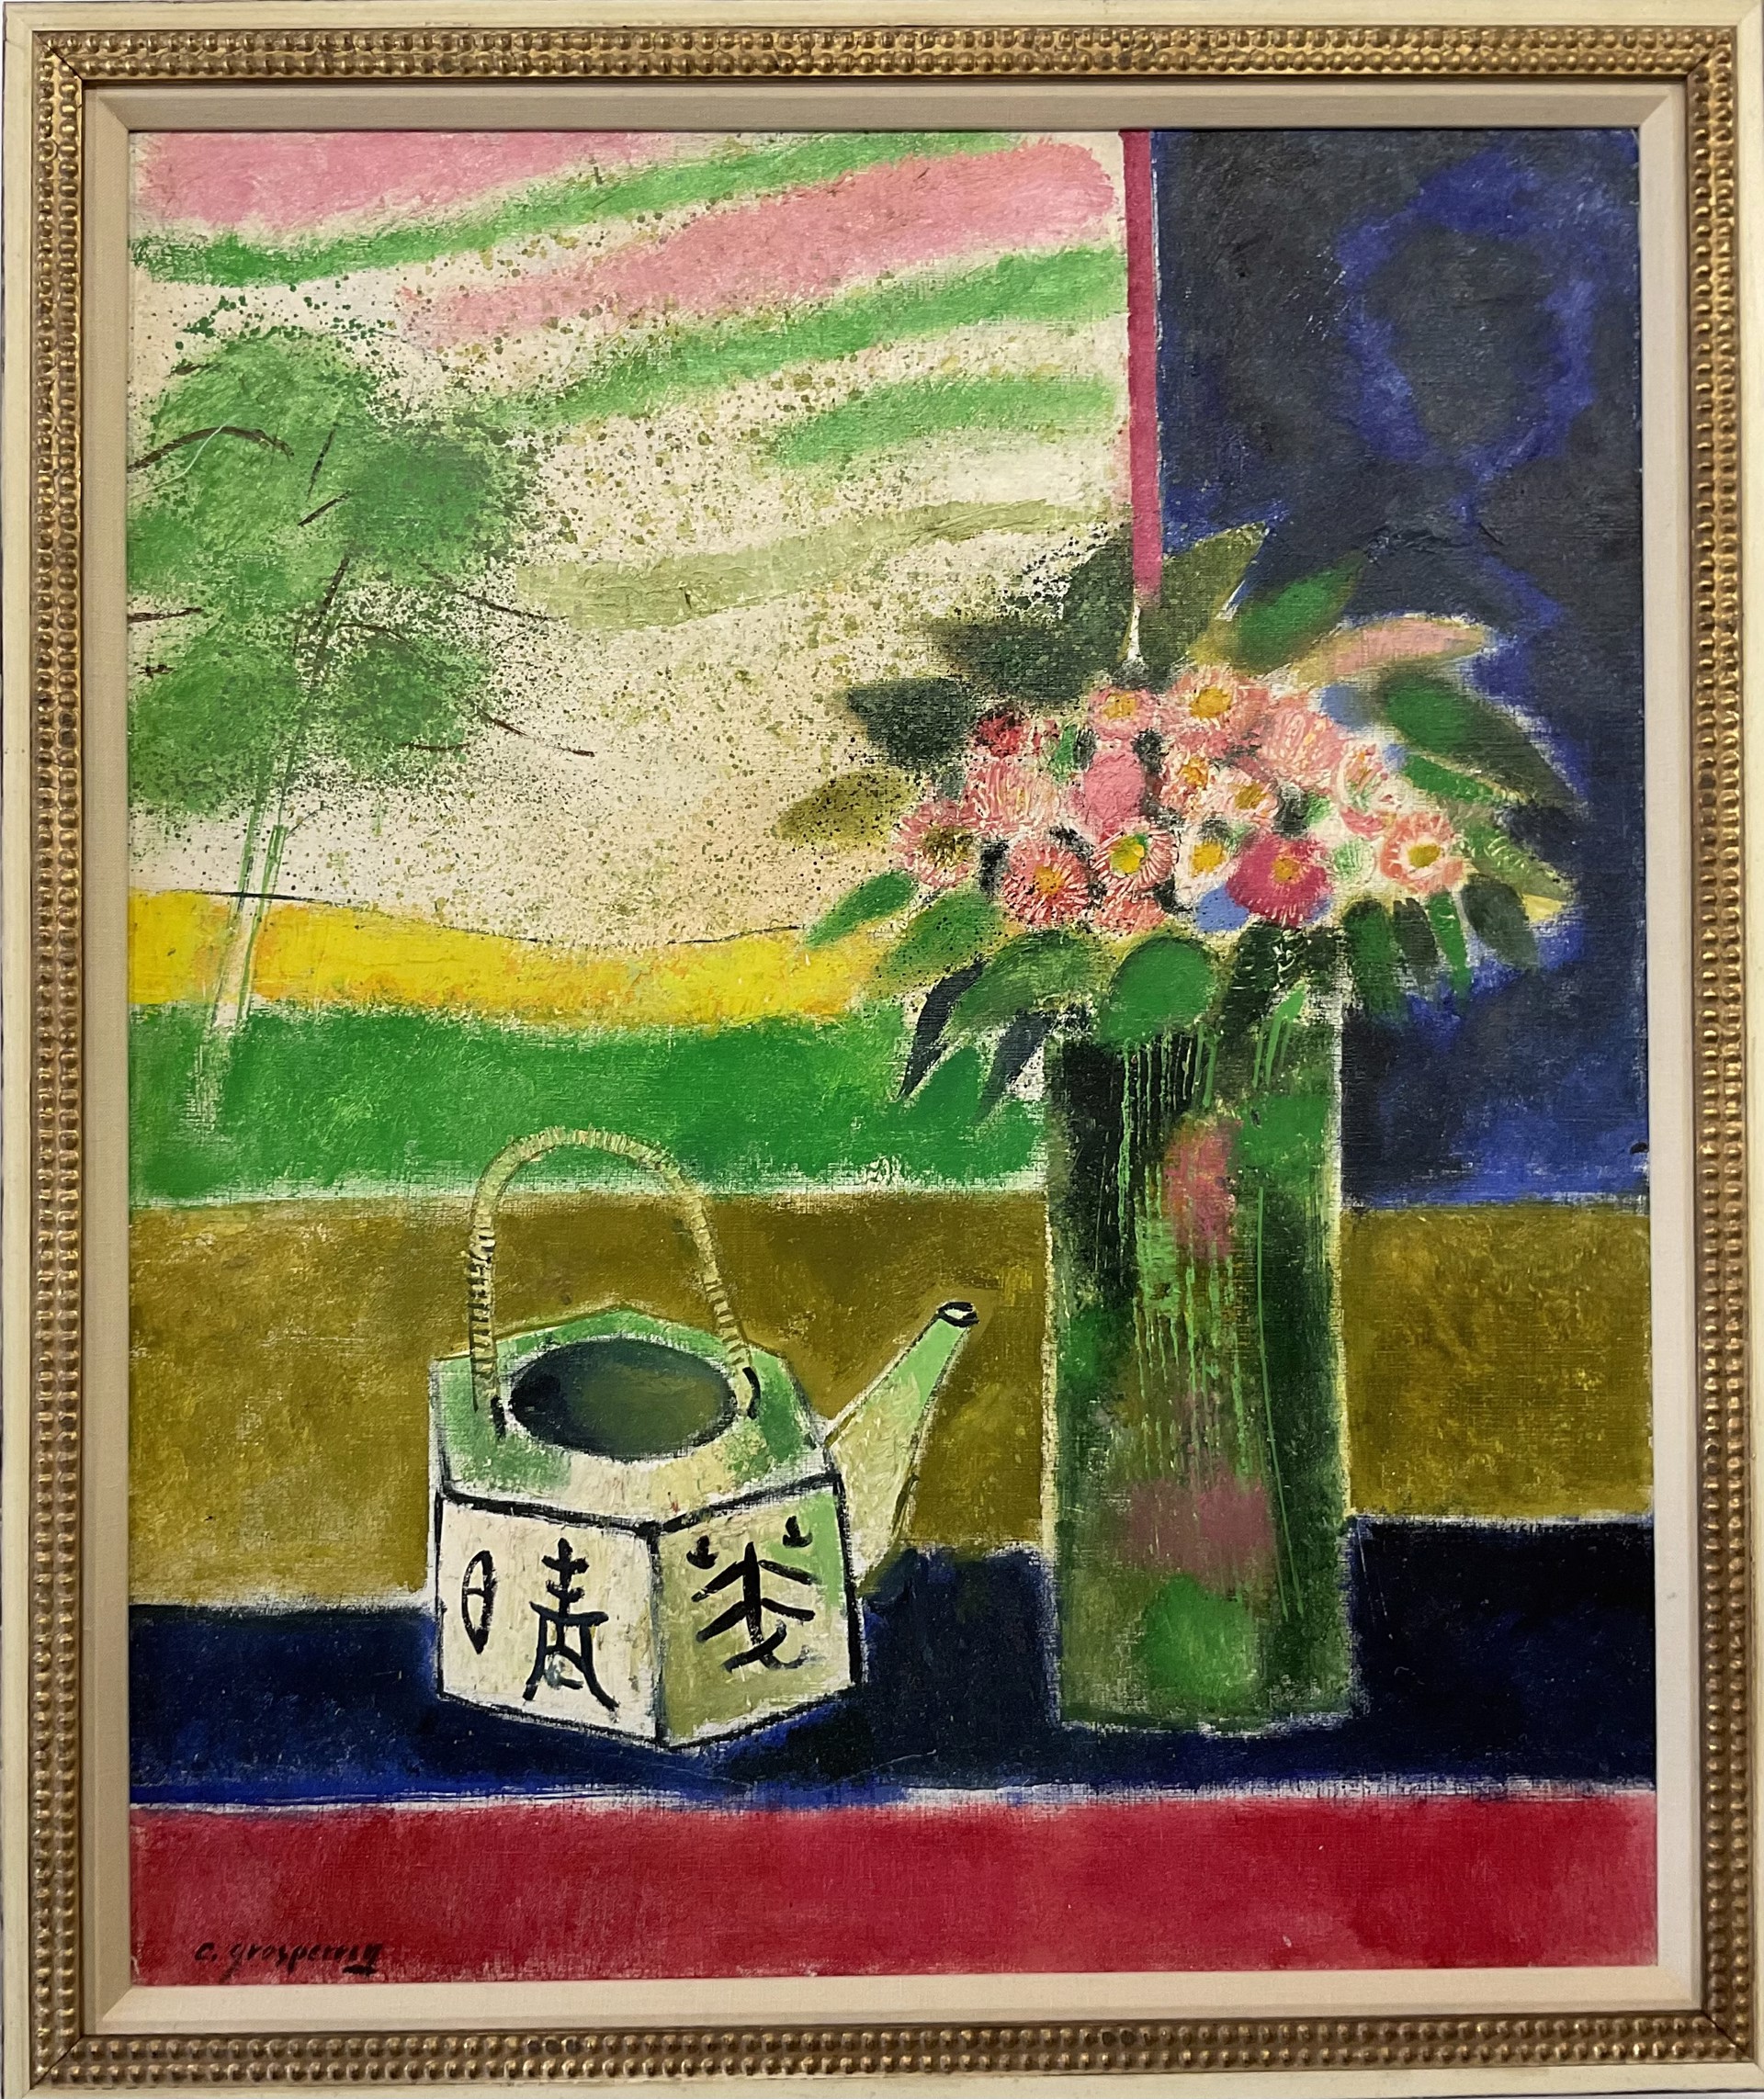 Teapot and Flowers by Claude Grosperrin